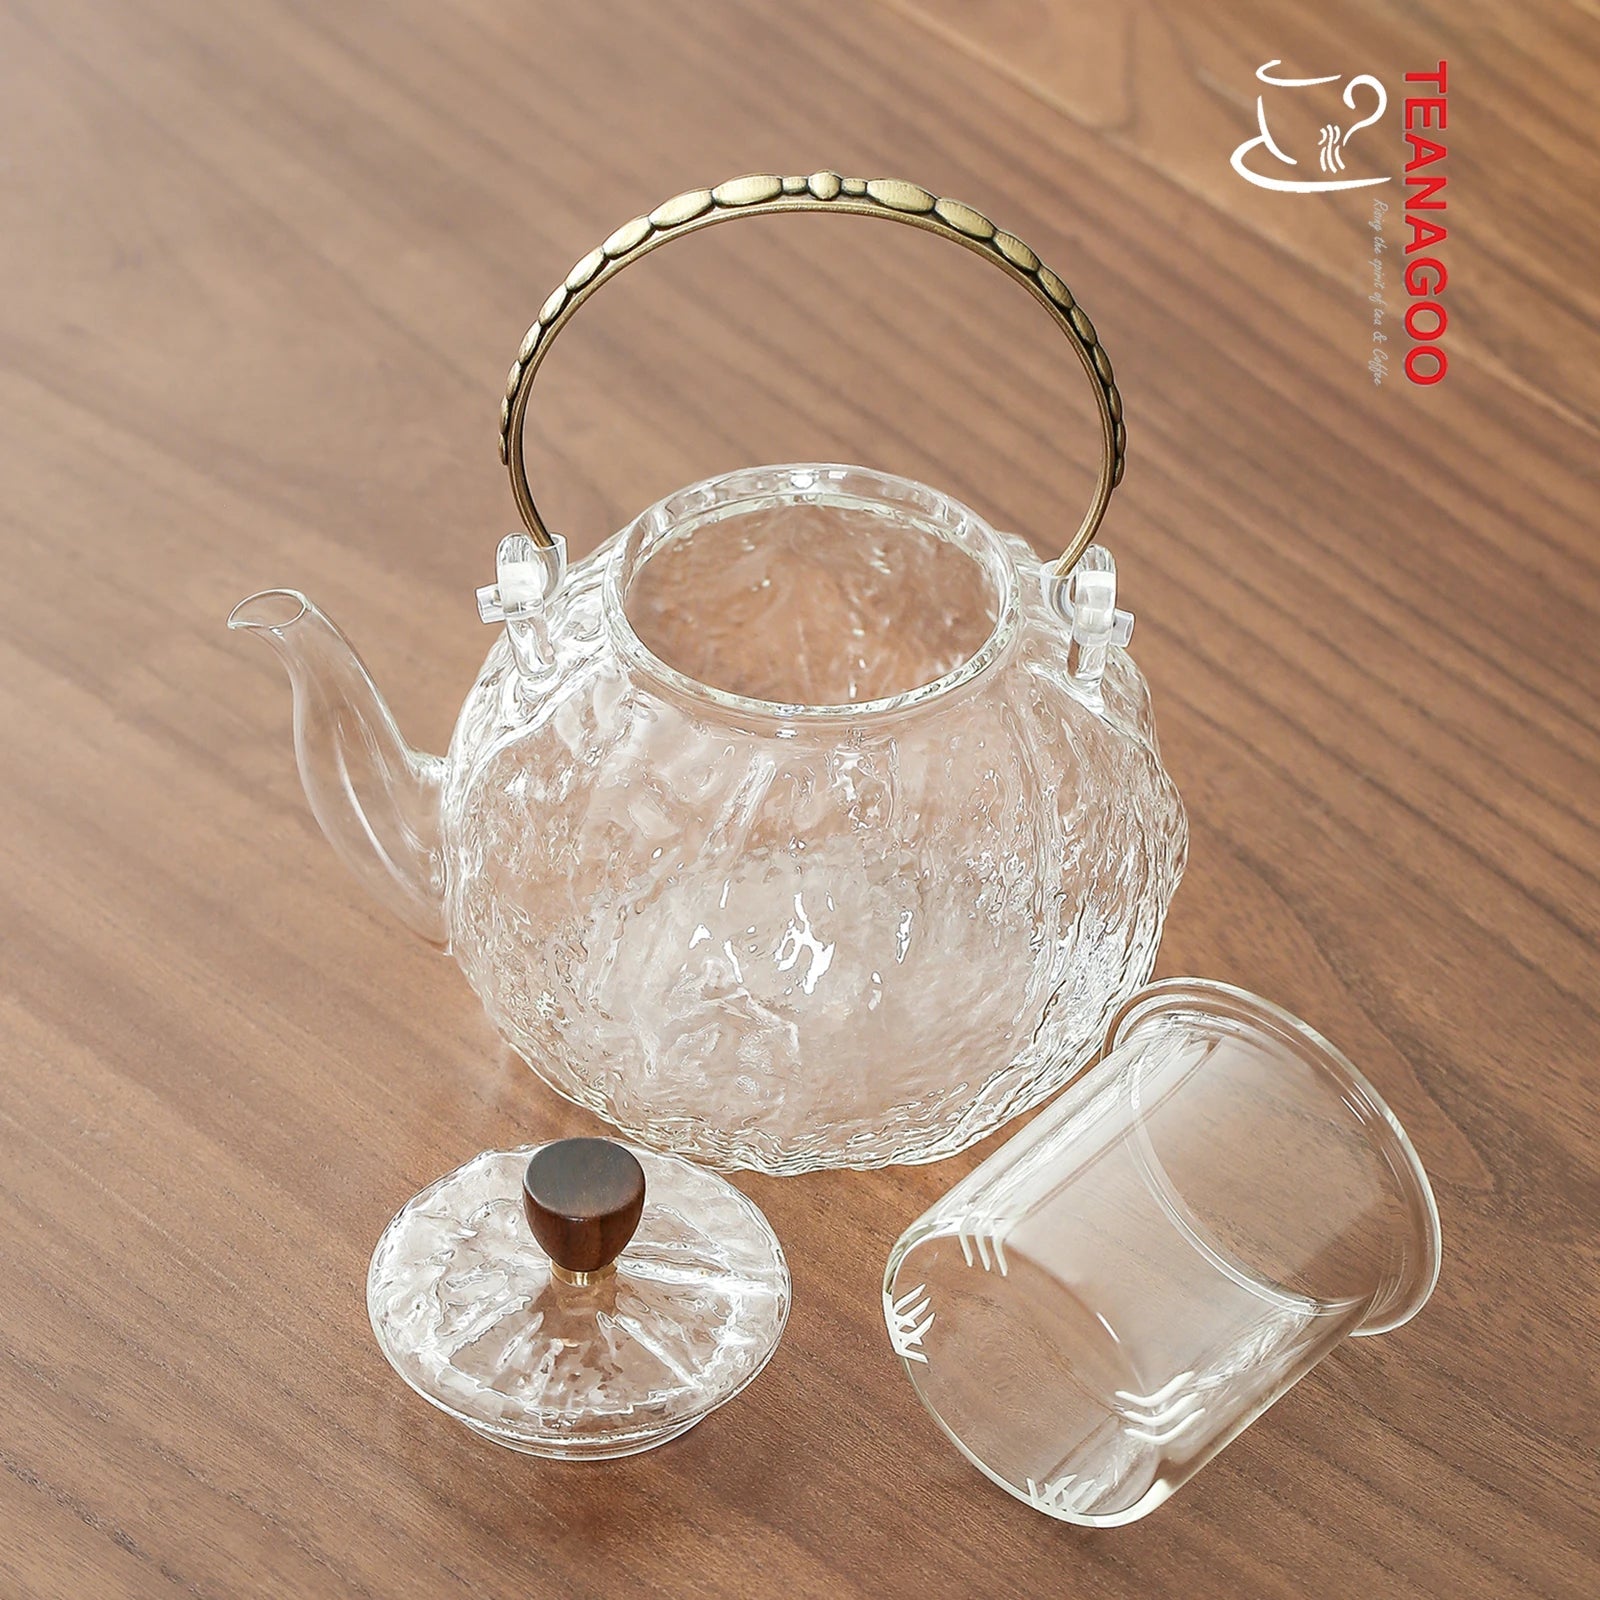 https://www.teanagoo.com/cdn/shop/products/Heat-Resistant_Glass_Teapot_with_Infuser_Lid_and_Wood_Handle_for_Loose_Leaf_Tea_and_Blooming_Tea_TP03-03.jpg?v=1668492799&width=1946